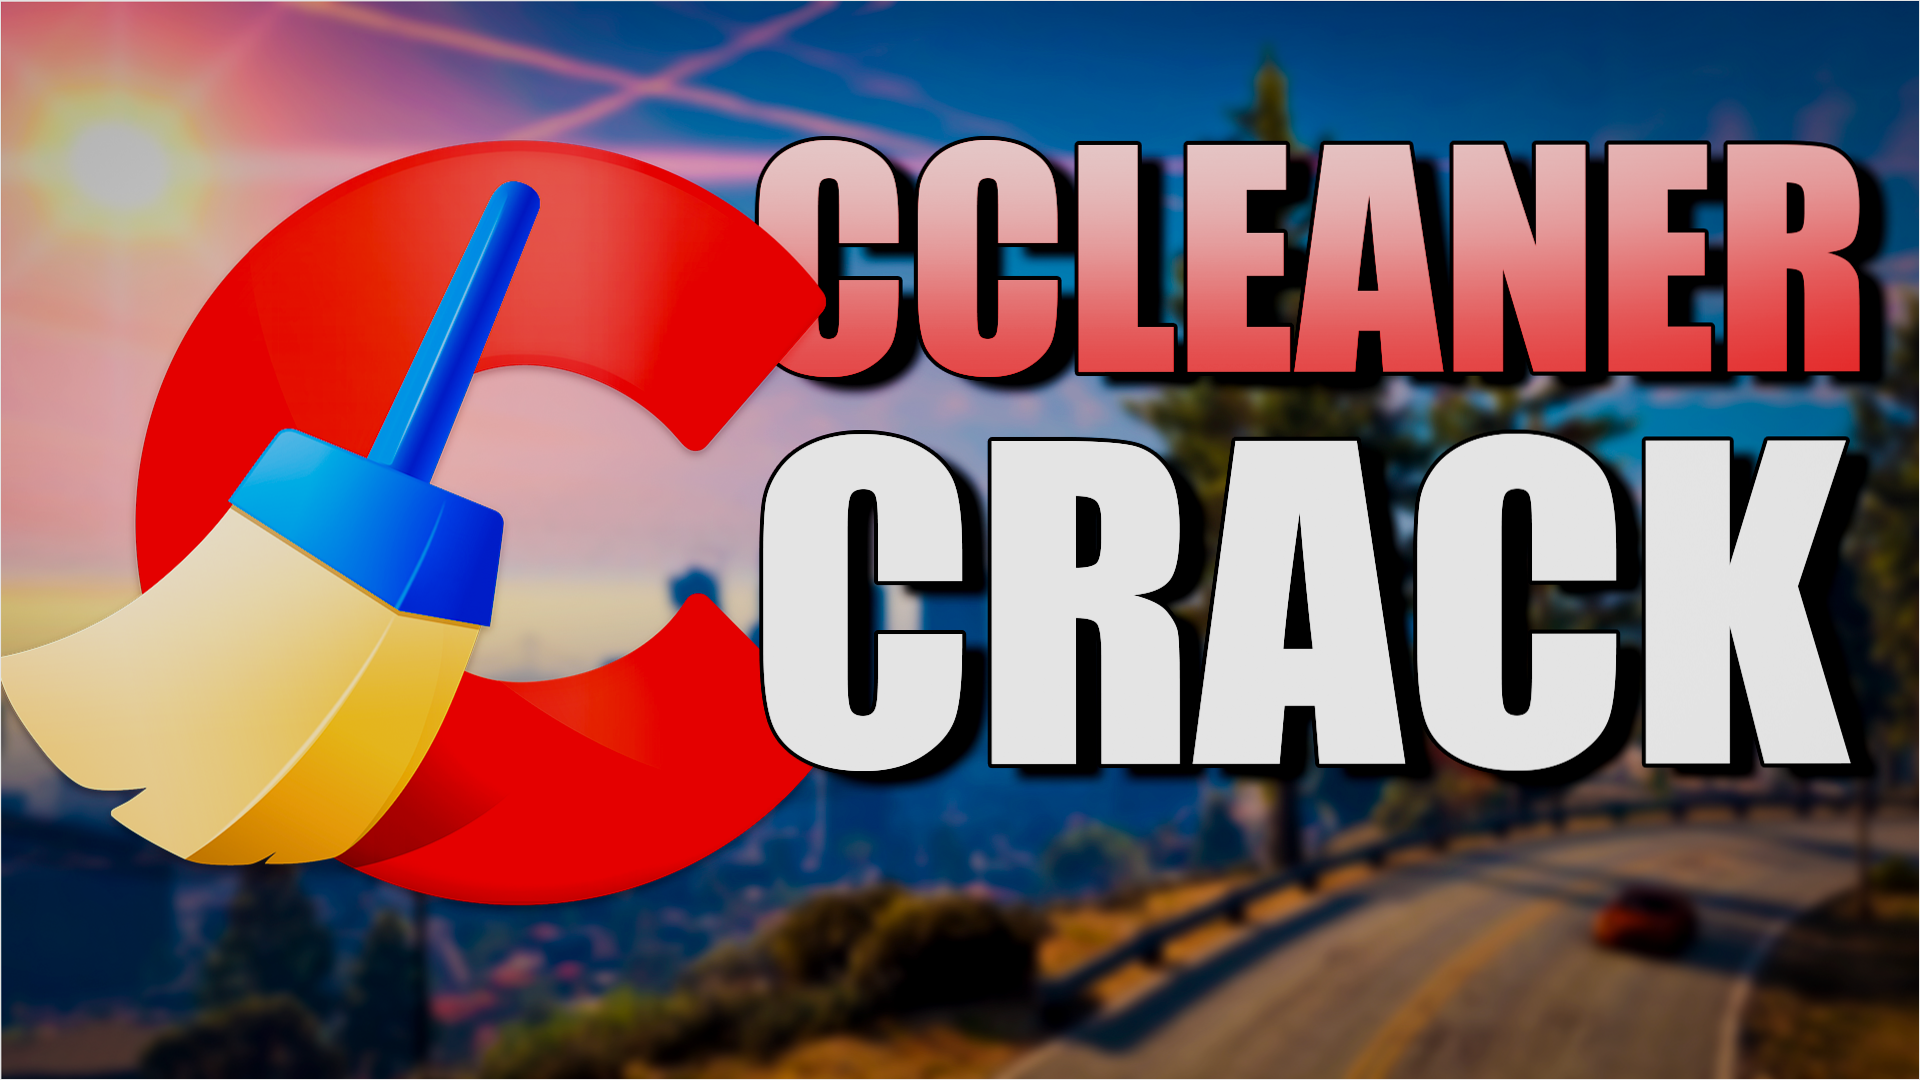 ccleaner pro portable 2022